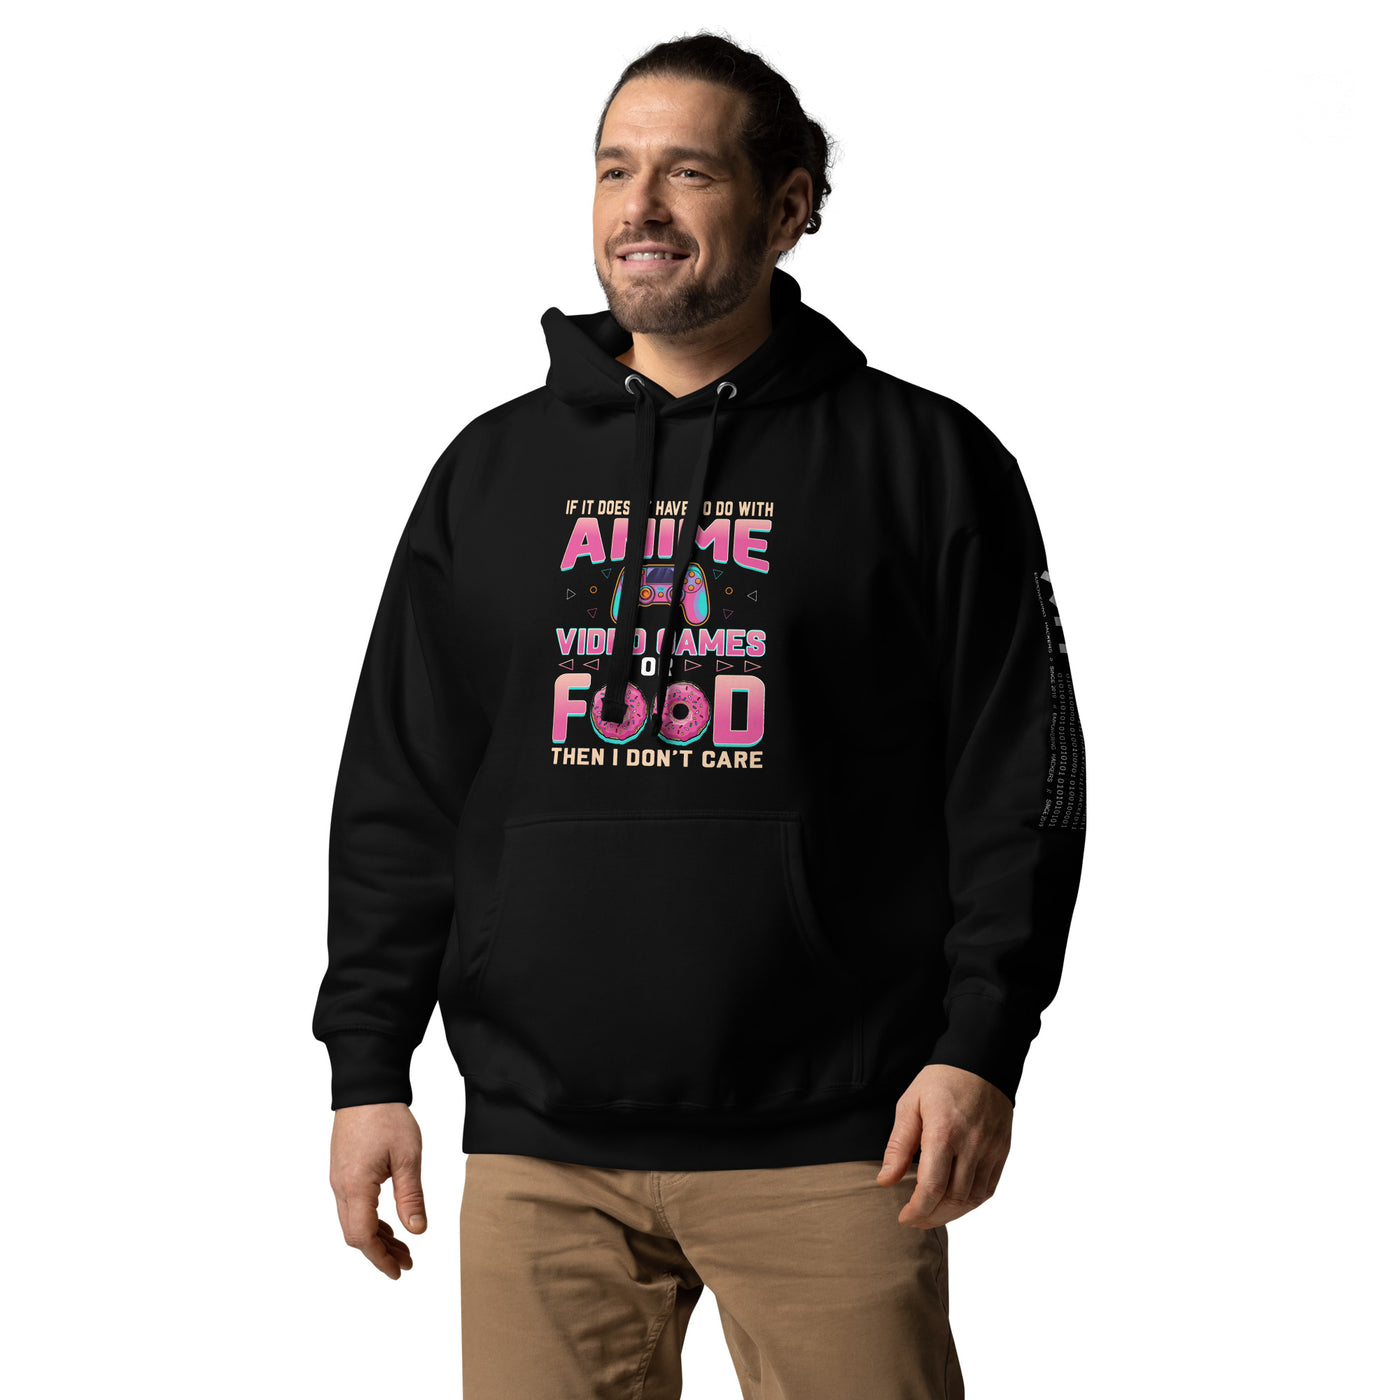 If it doesn't have to do with anime Video game, then I don't care - Unisex Hoodie